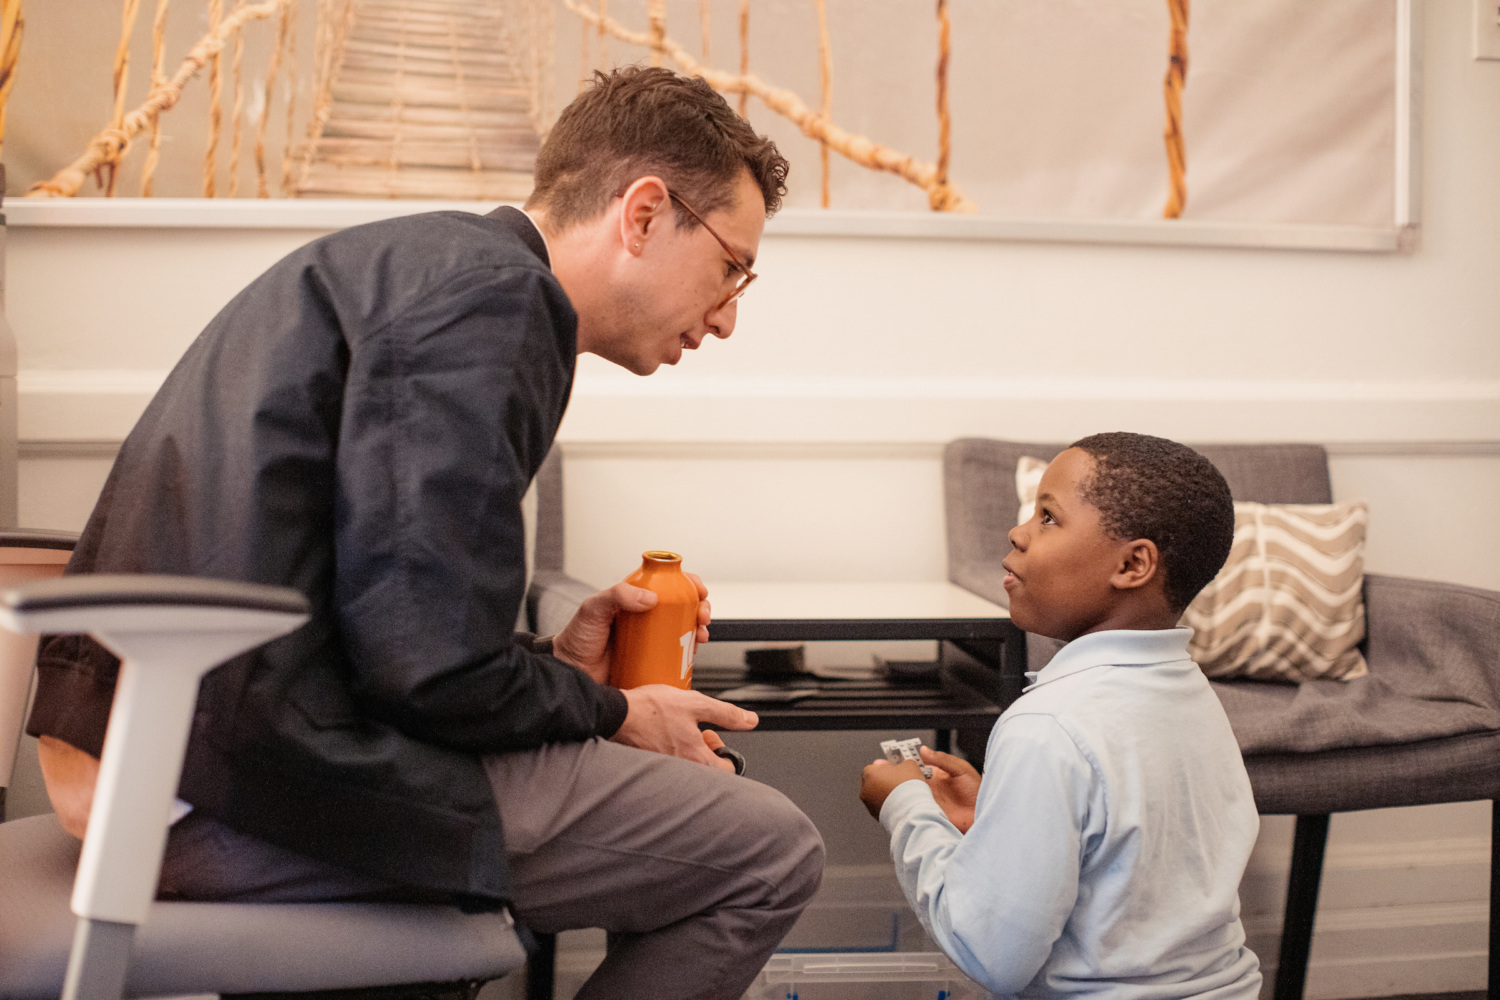 An white man sitting in an office share leans in to speak with a young Black boy